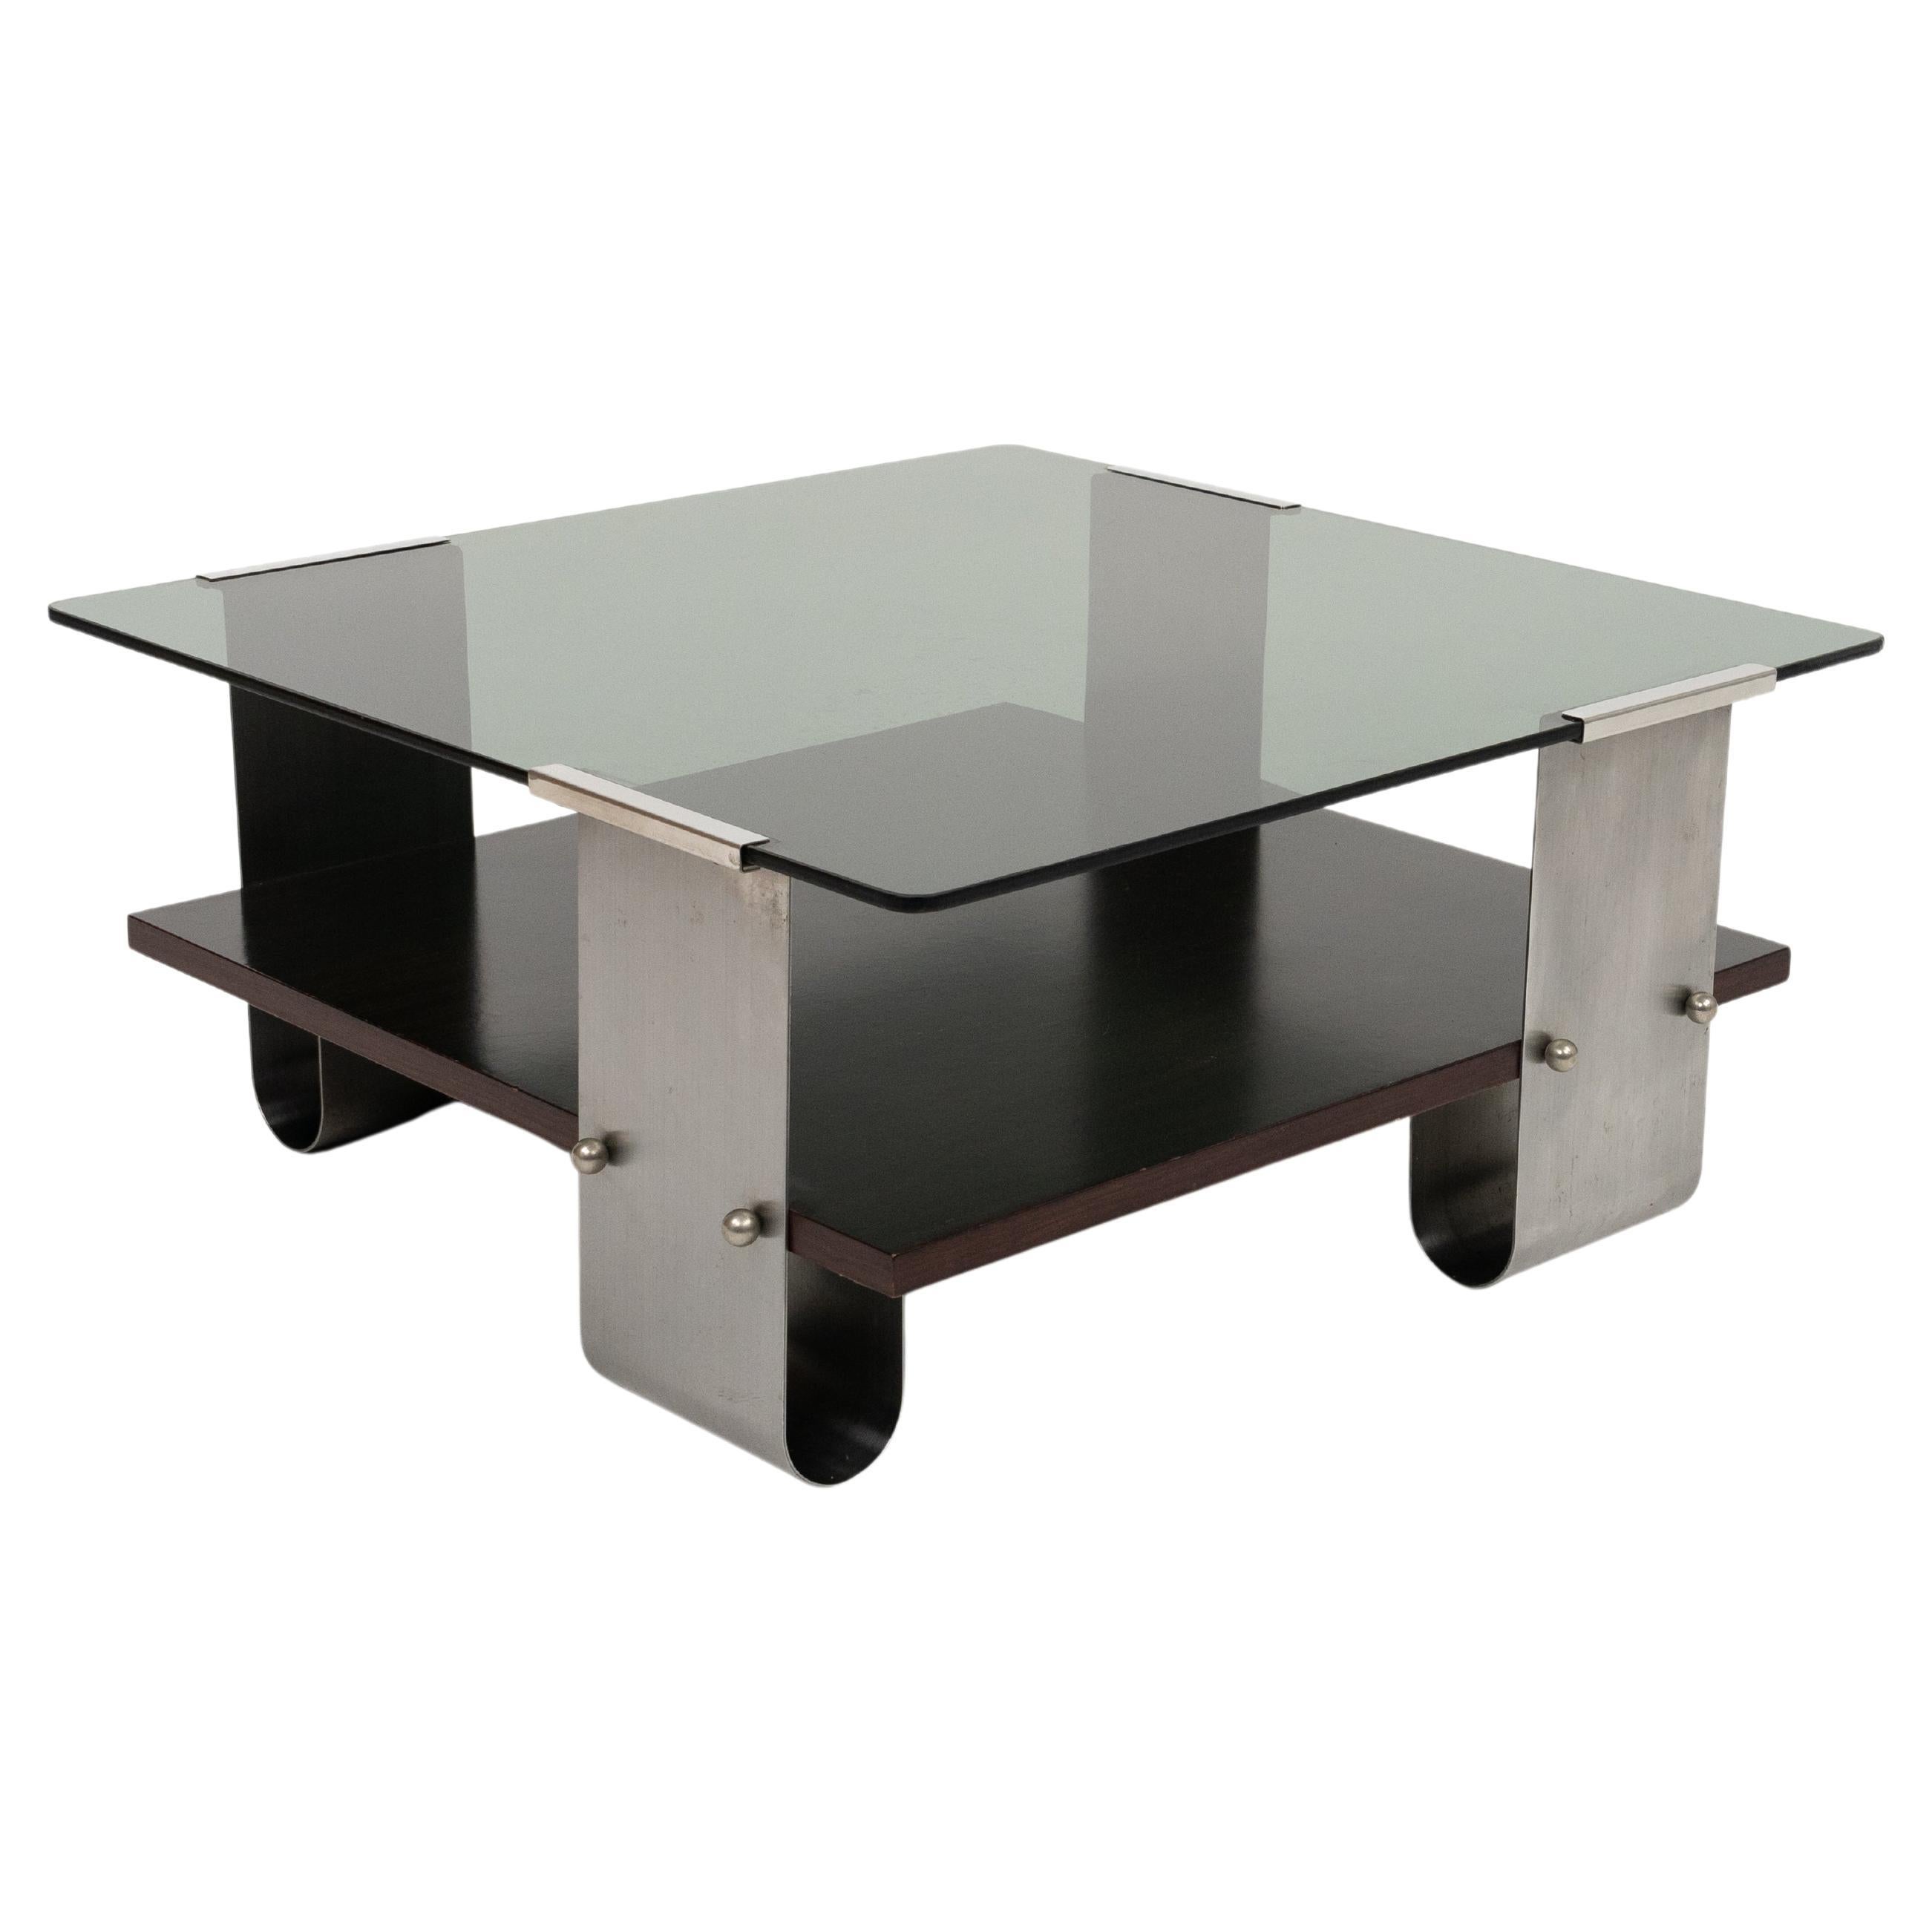 Midcentury Coffee Table in Steel, Wood & Glass by Francois Monnet, France, 1970s For Sale 9